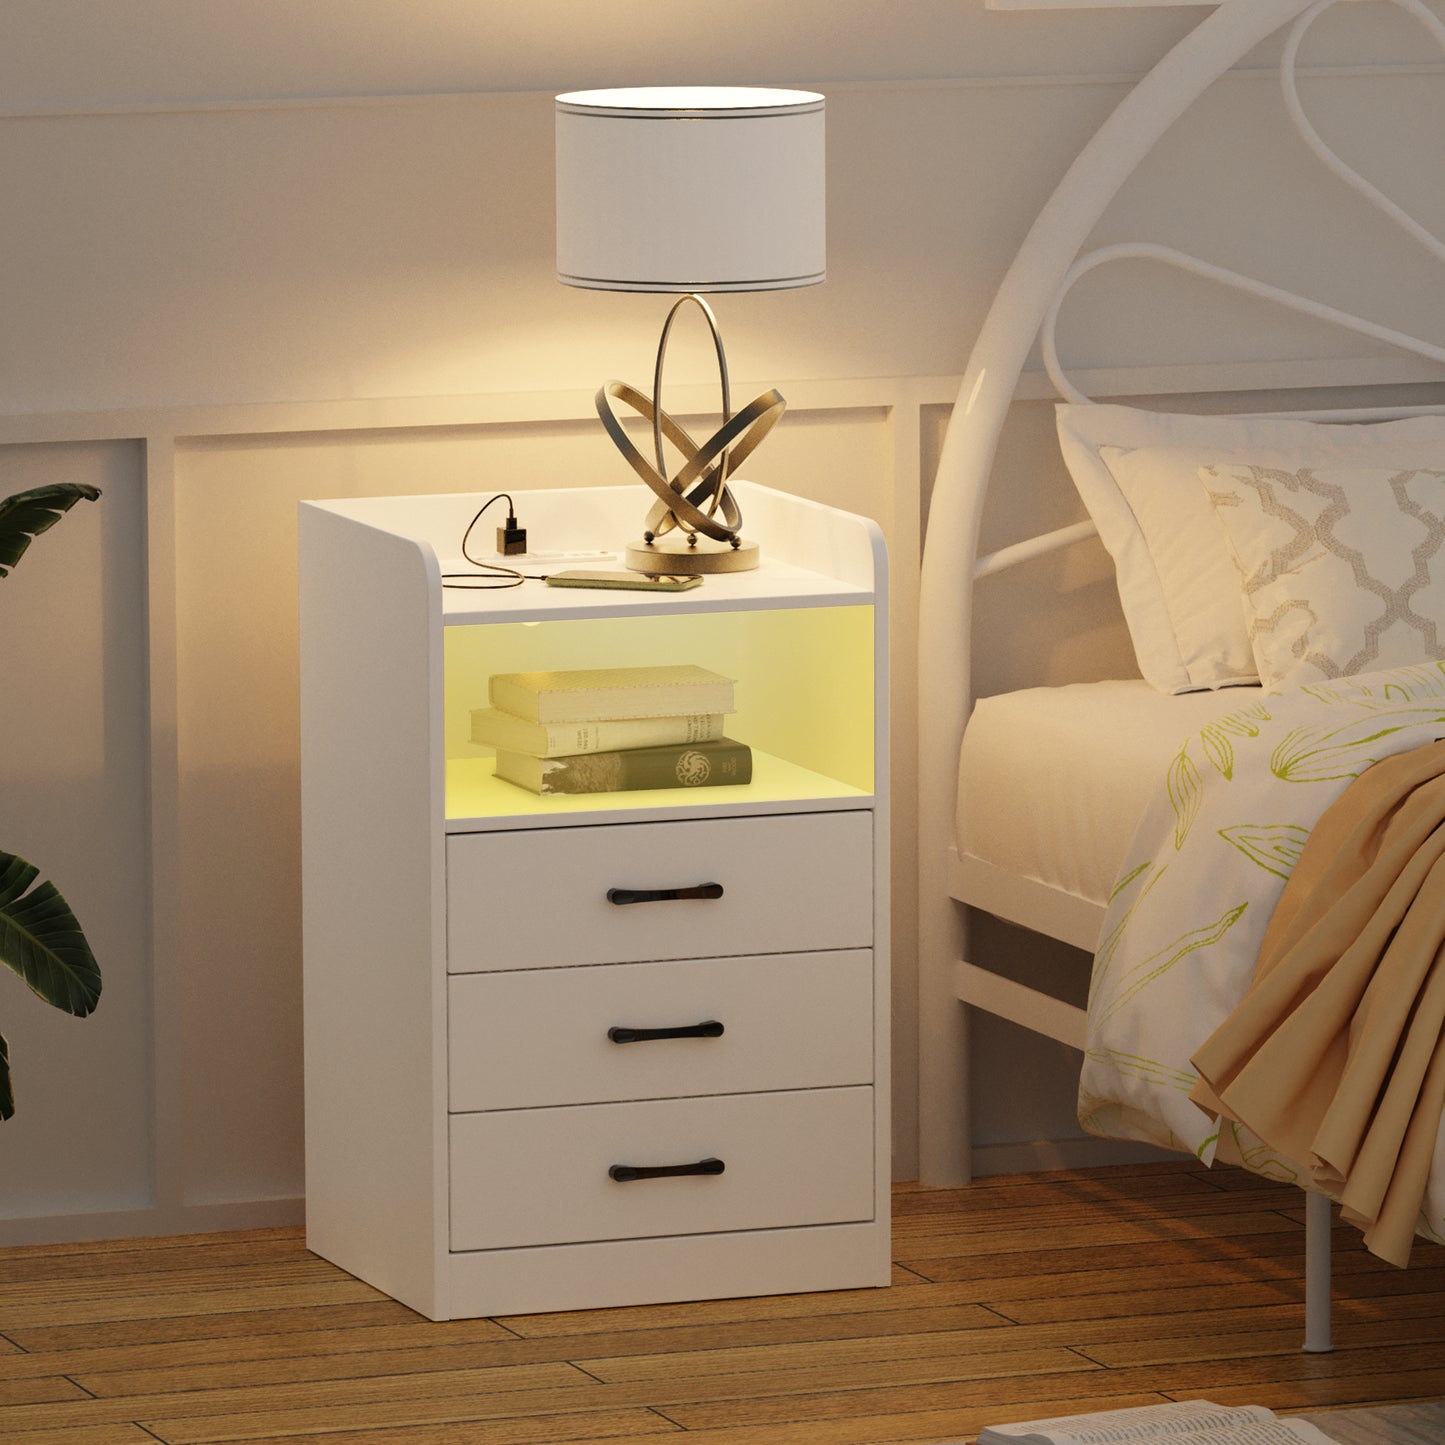 SUPERJARE Nightstand with Charging Station and LED Light Strips, Night Stand with Drawers, End Table with USB Ports and Outlets, White